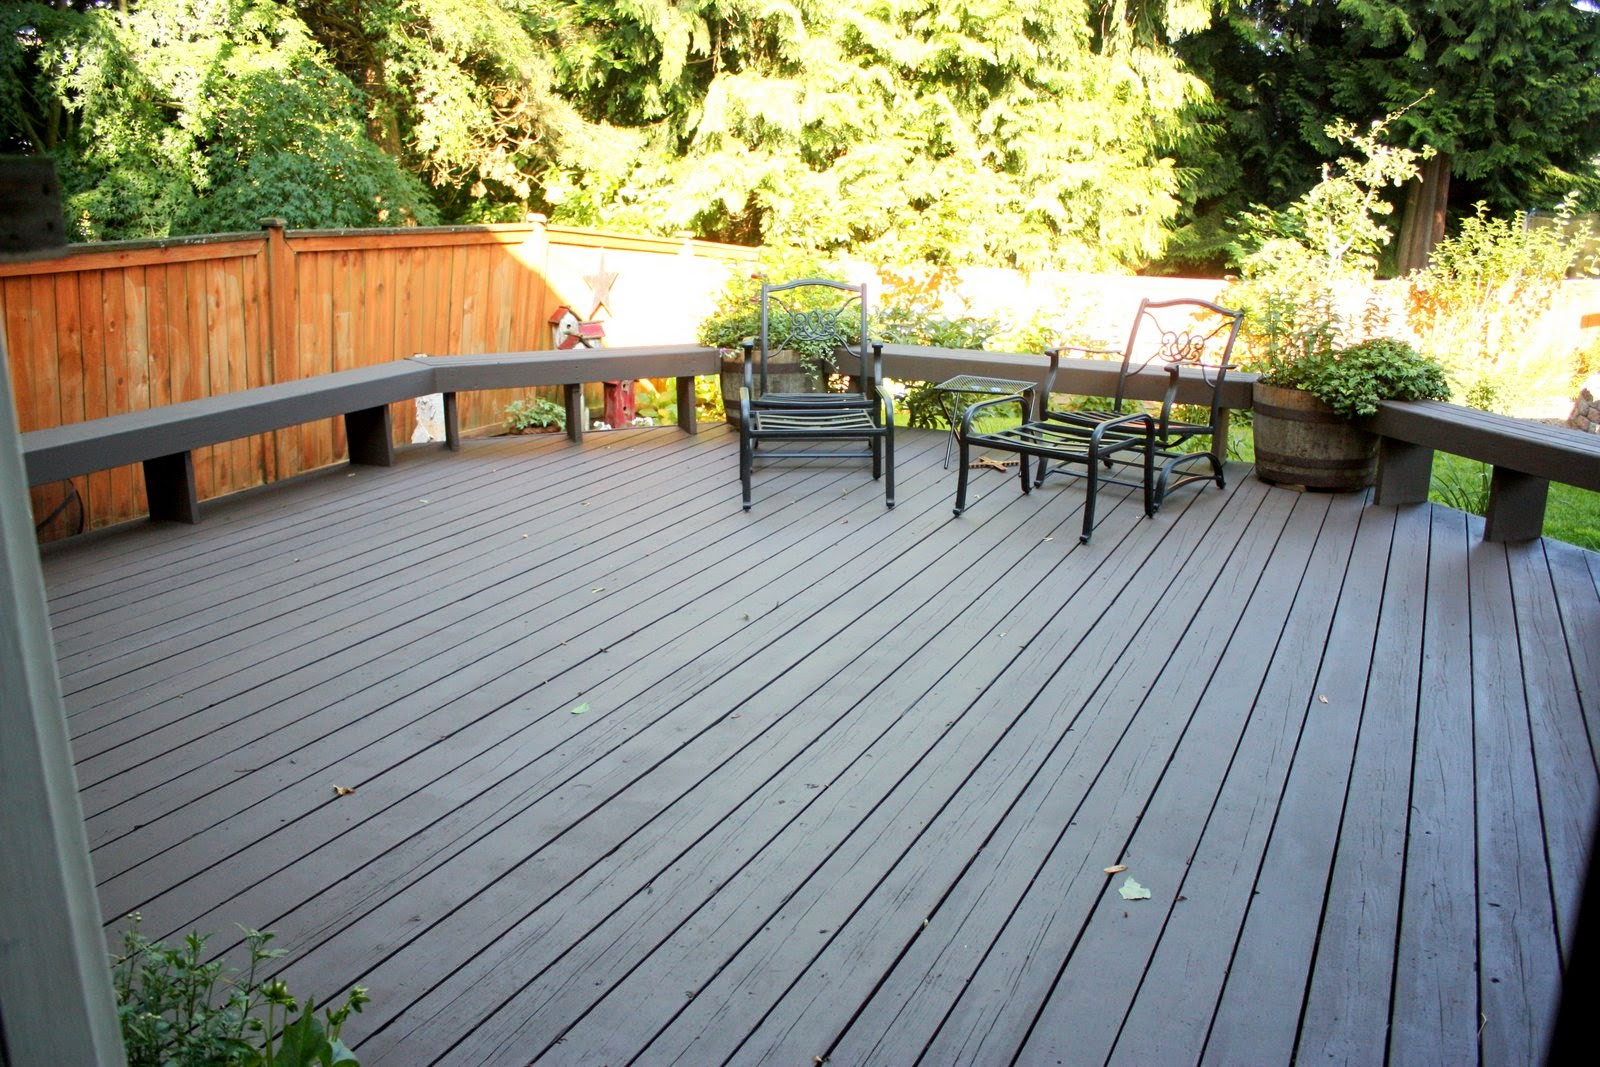 Behr Deck Paint
 Home is Where My Story Begins The Deck Makeover with Behr